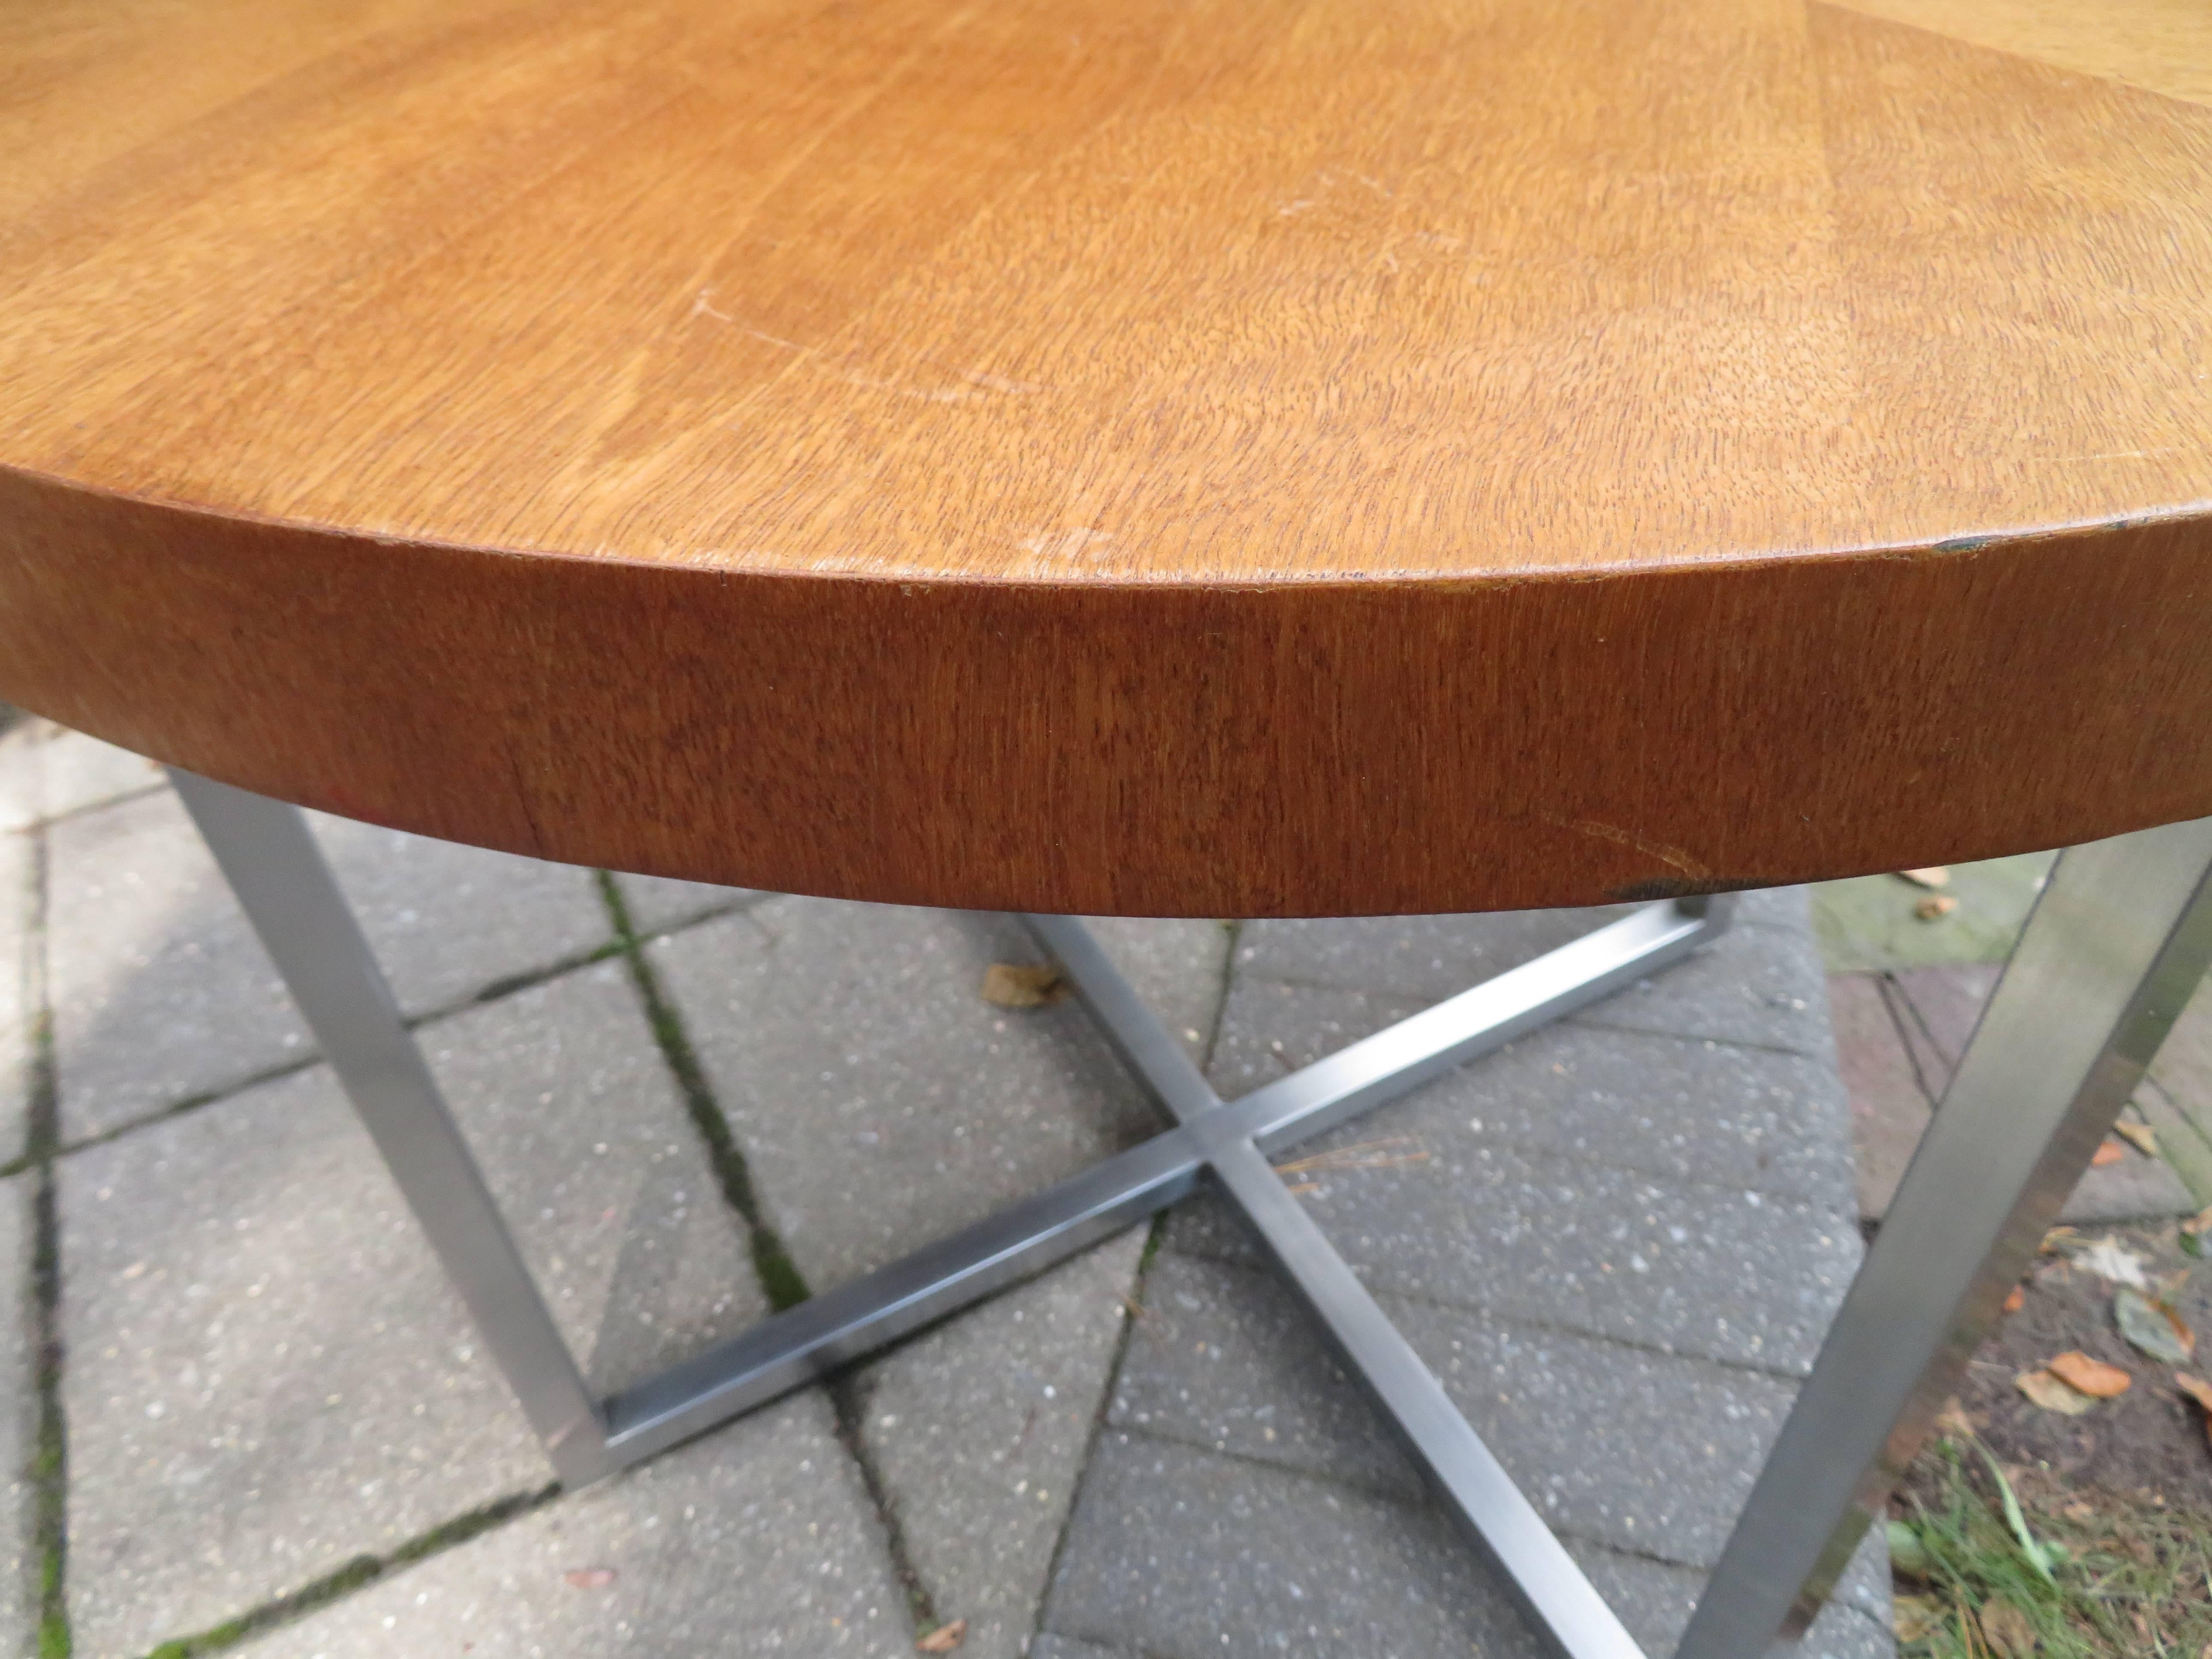 Lovely Milo Baughman Style Round Teak ‘X‘ Chrome Base Side End Table In Good Condition For Sale In Pemberton, NJ